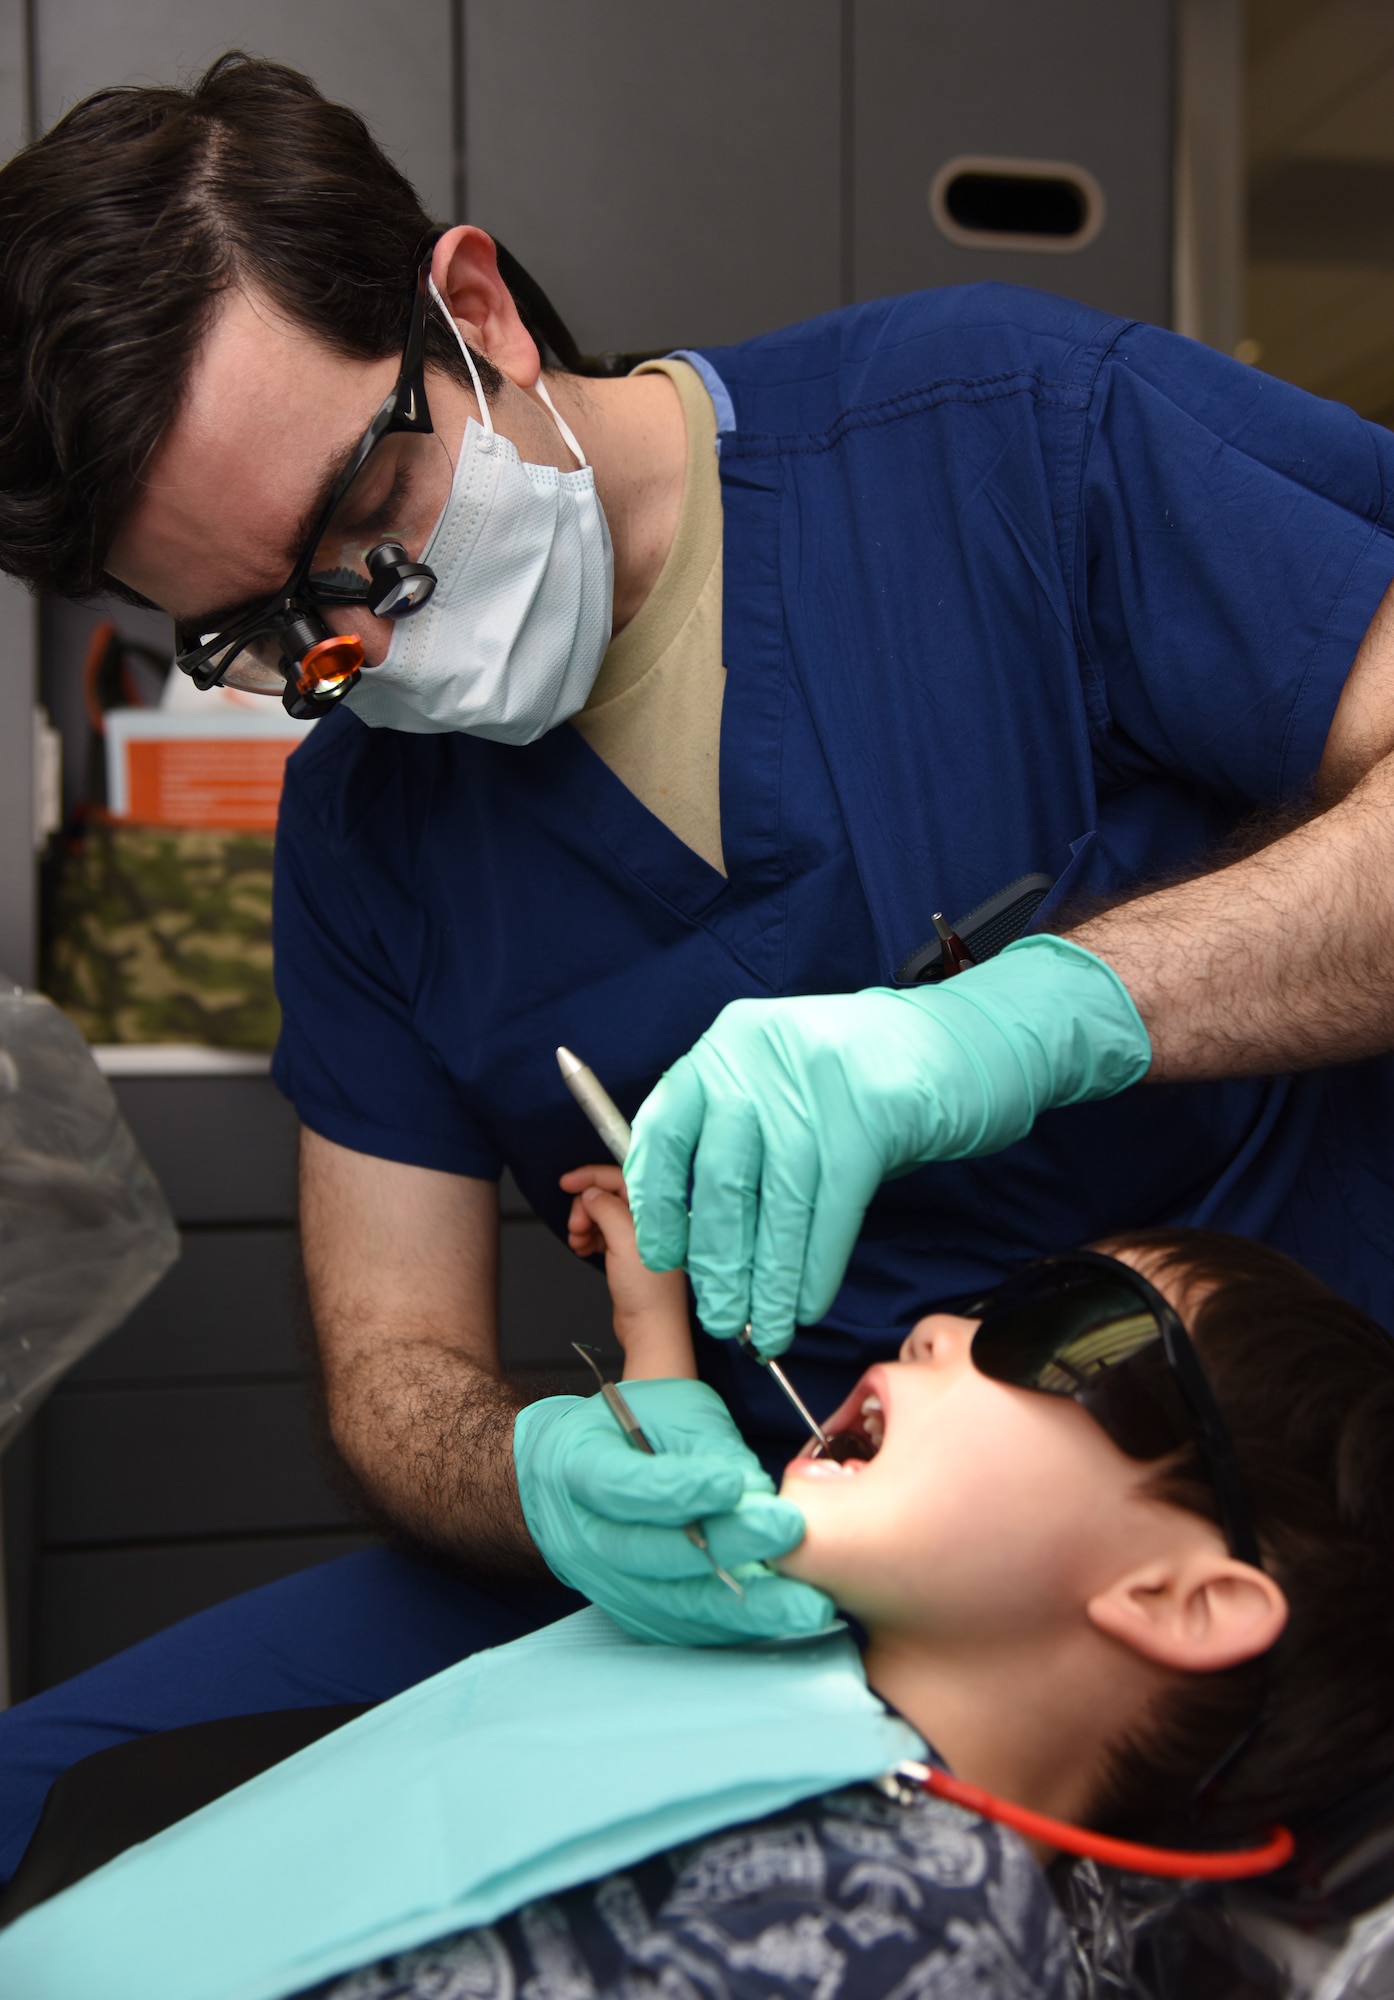 U.S. Air Force Capt. (Dr.) Stephan Javaheri, 81st Dental Squadron general dentist, conducts a dental exam on William Blankenship, II, son of Master Sgt. William Blankenship, 81st Training Support Squadron qualification training developer, during the 9th Annual Give Kids a Smile Day at the dental clinic inside the Keesler Medical Center at Keesler Air Force Base, Mississippi, Feb. 15, 2019. The event was held in recognition of National Children's Dental Health Month and included free dental exams, radiographs and cleanings for children age two and older. (U.S. Air Force photo by Kemberly Groue)